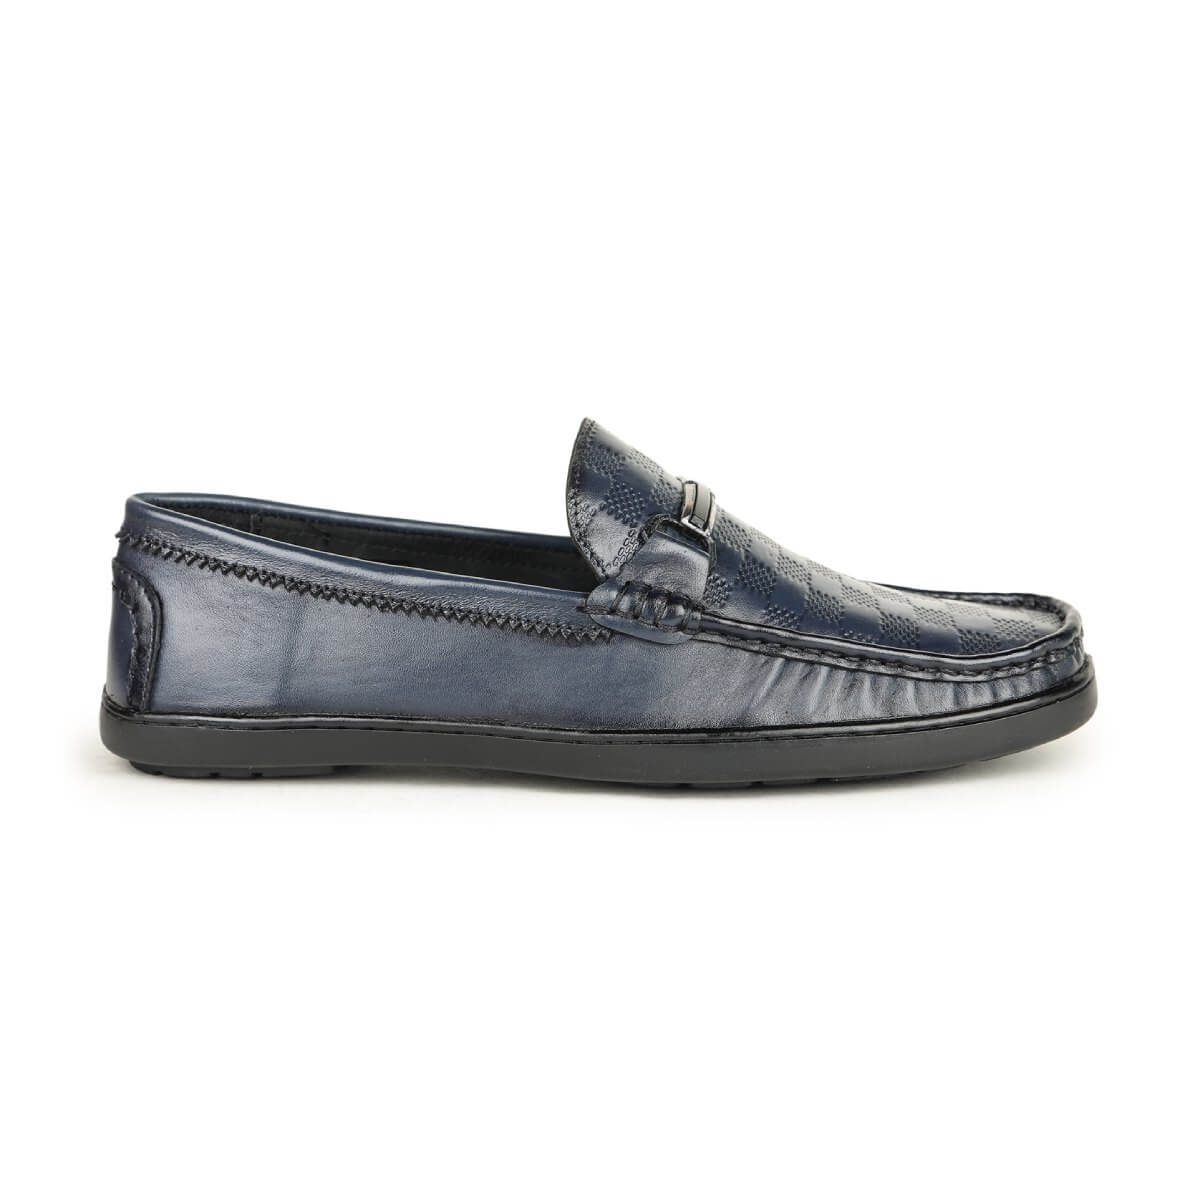 checkbox pattern loafers blue_6